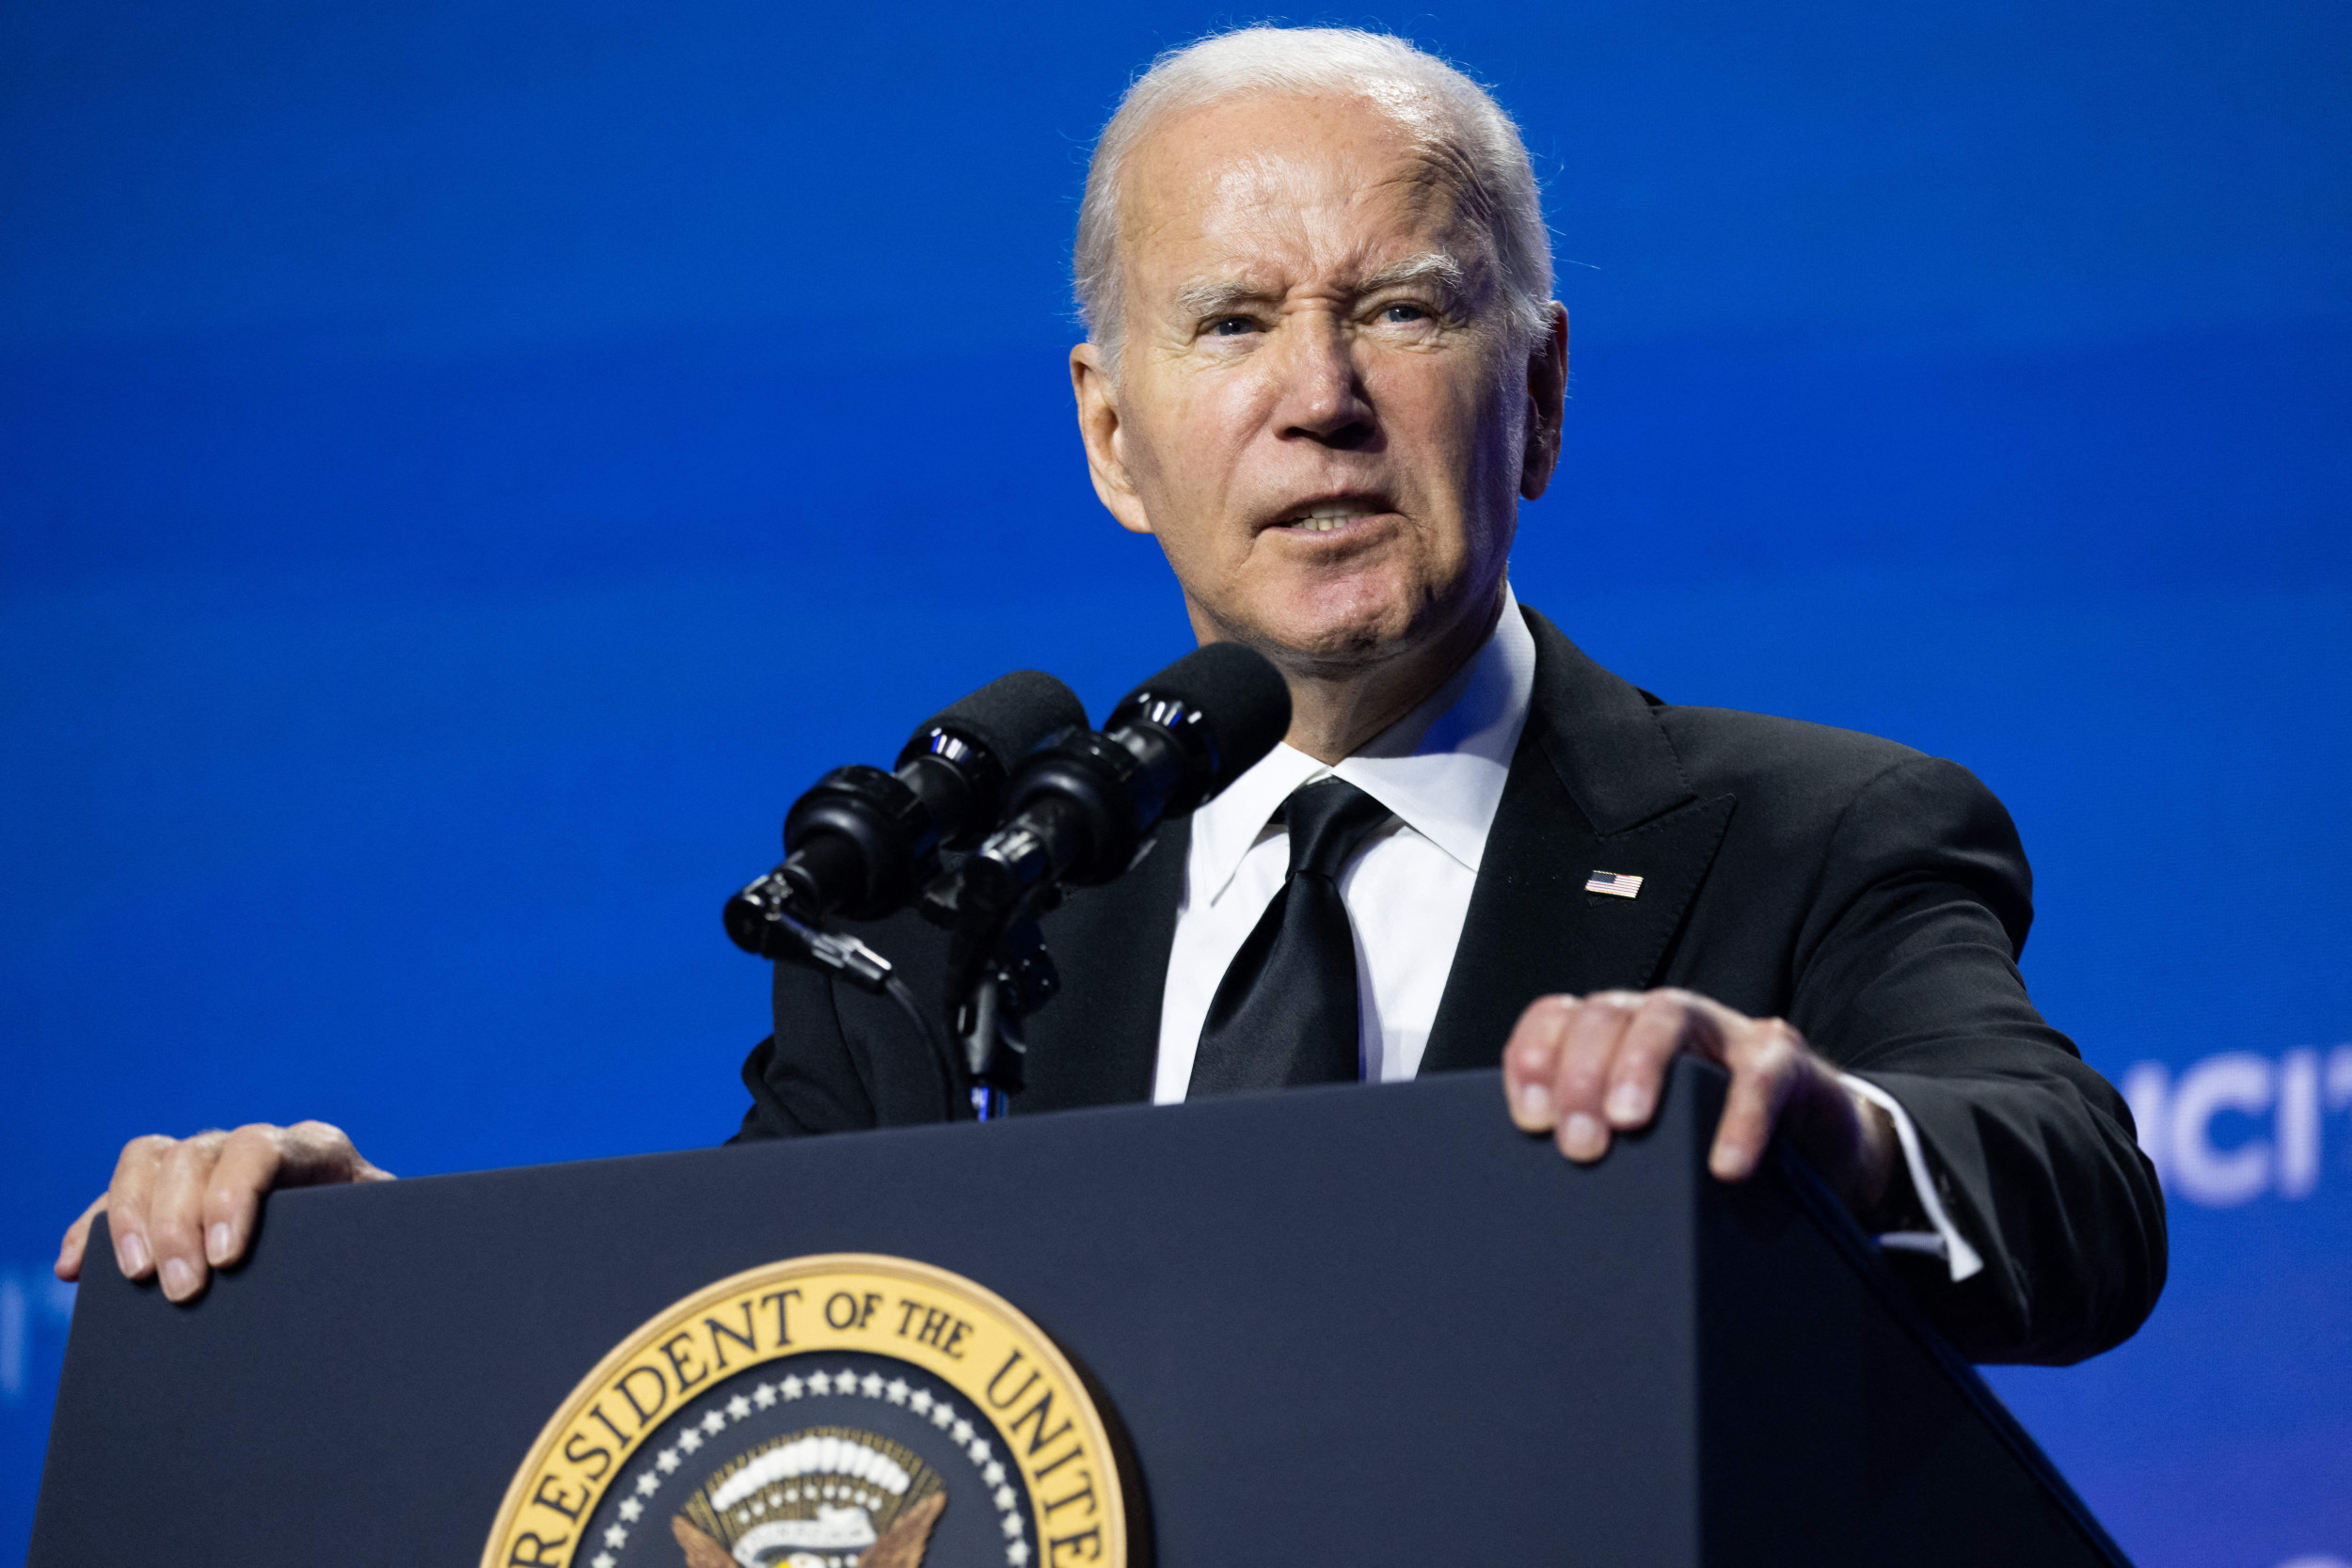 Credit Scores of Millions Could Be Improved by Biden Plan